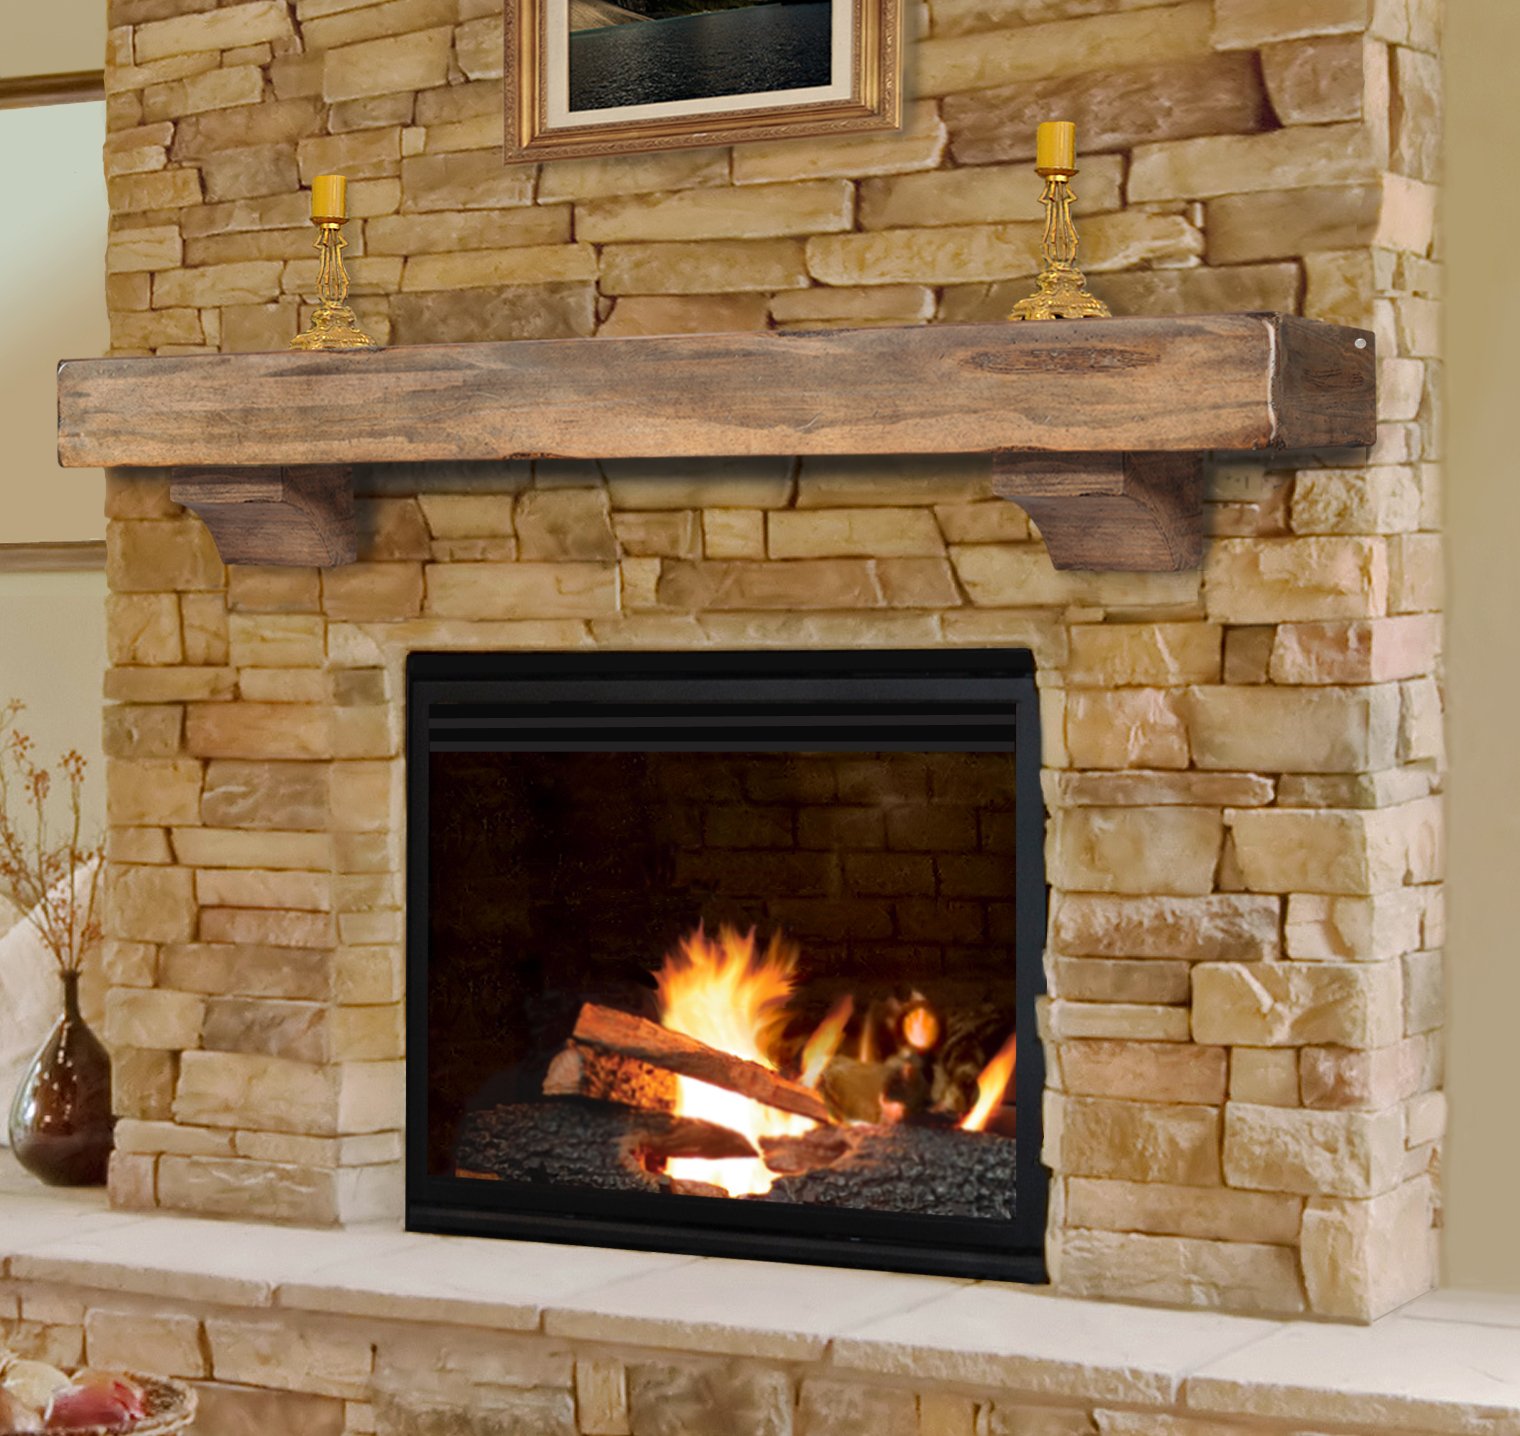 Non Combustible Fireplace Mantel Awesome Amazon Pearl Mantels Fireplace Mantel Shelves